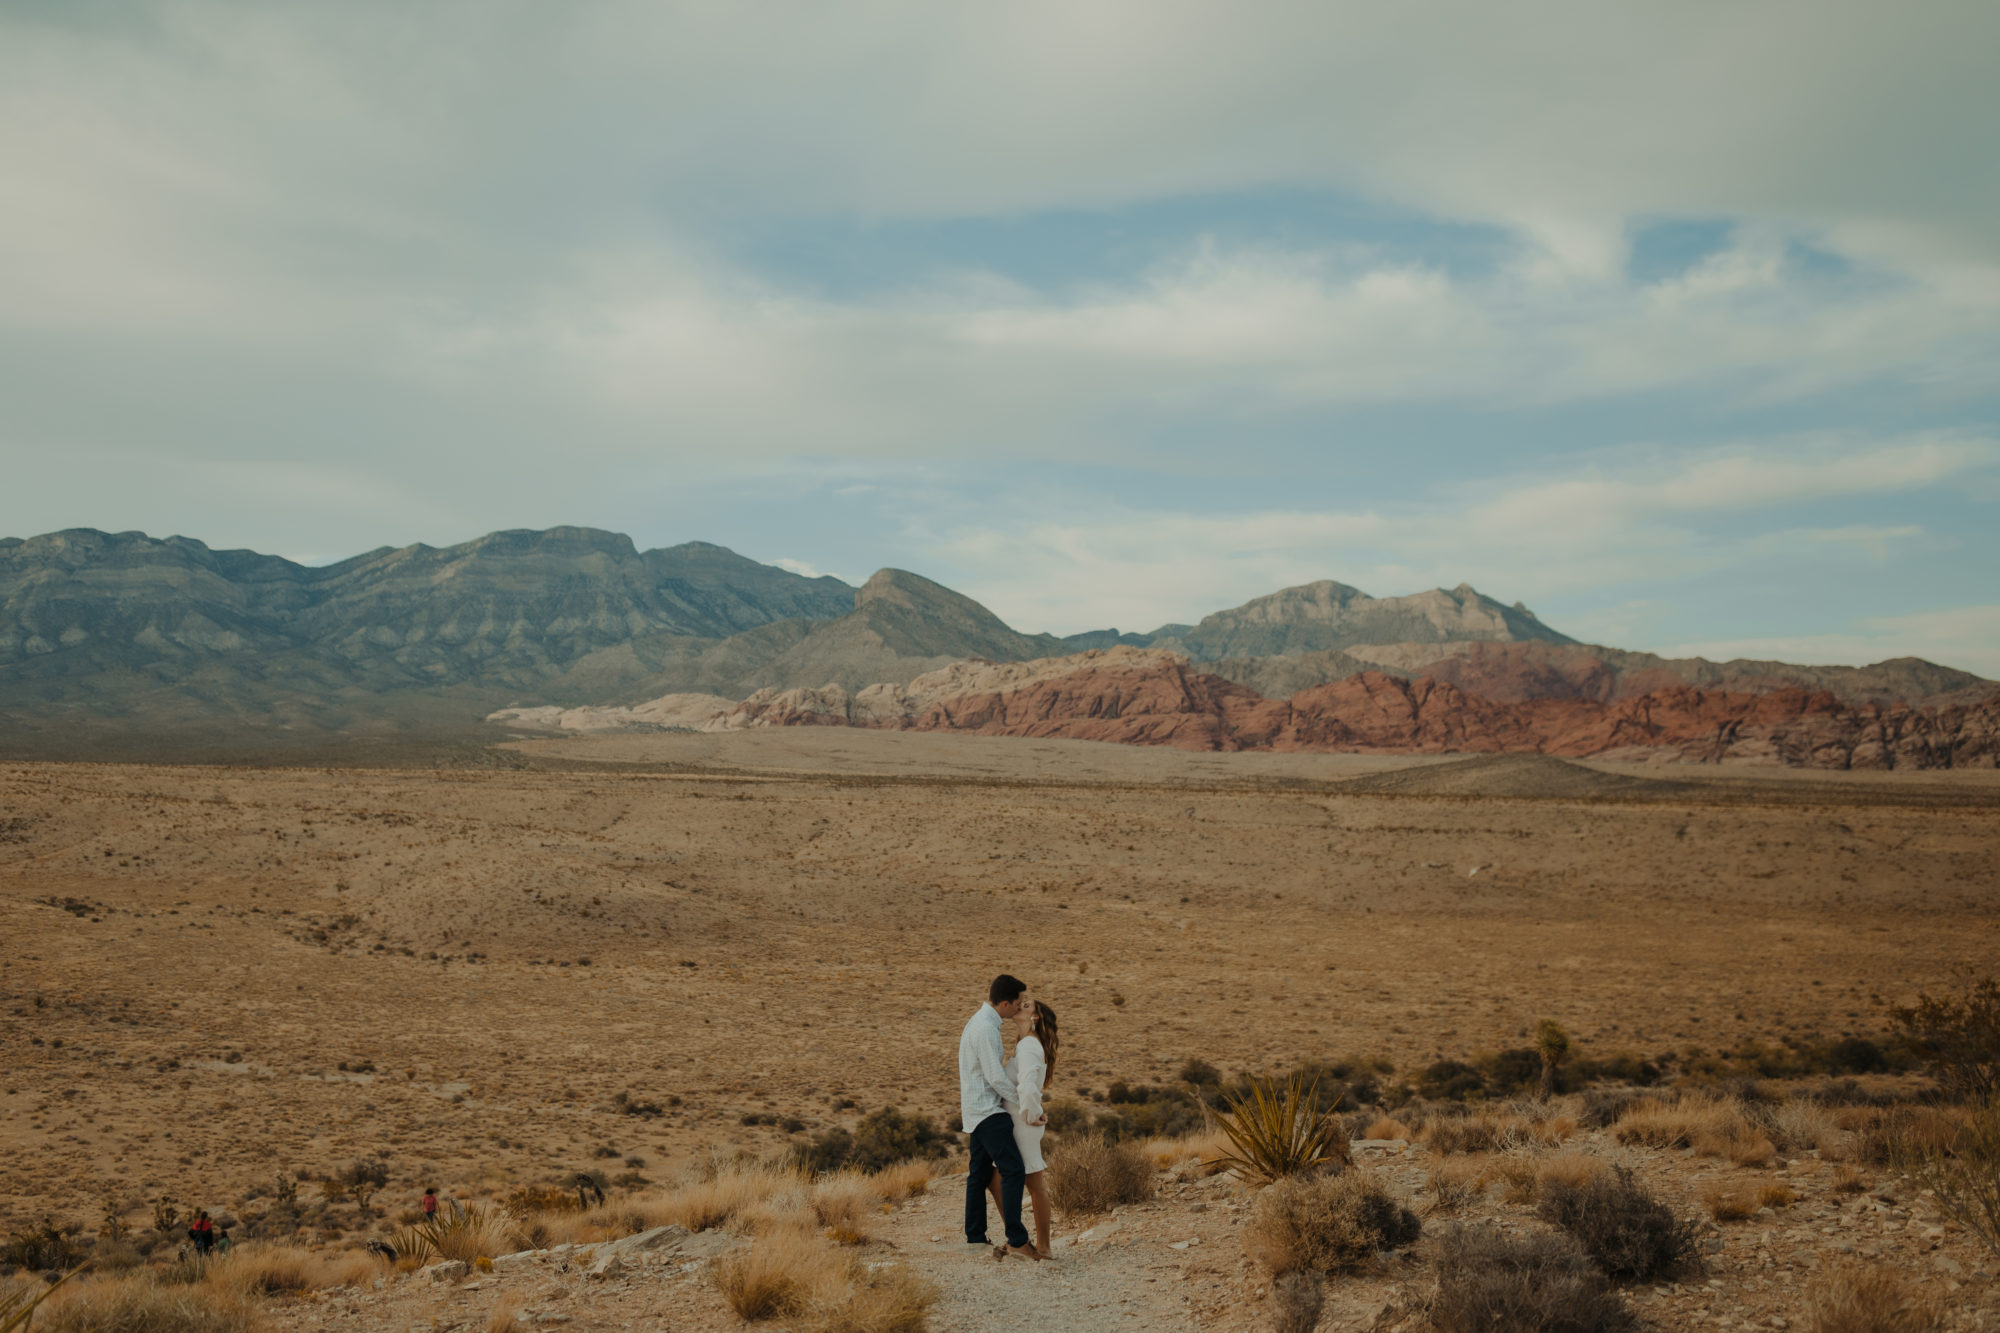 newly engaged couple embracing while kissing each other in the desert after just being proposed too